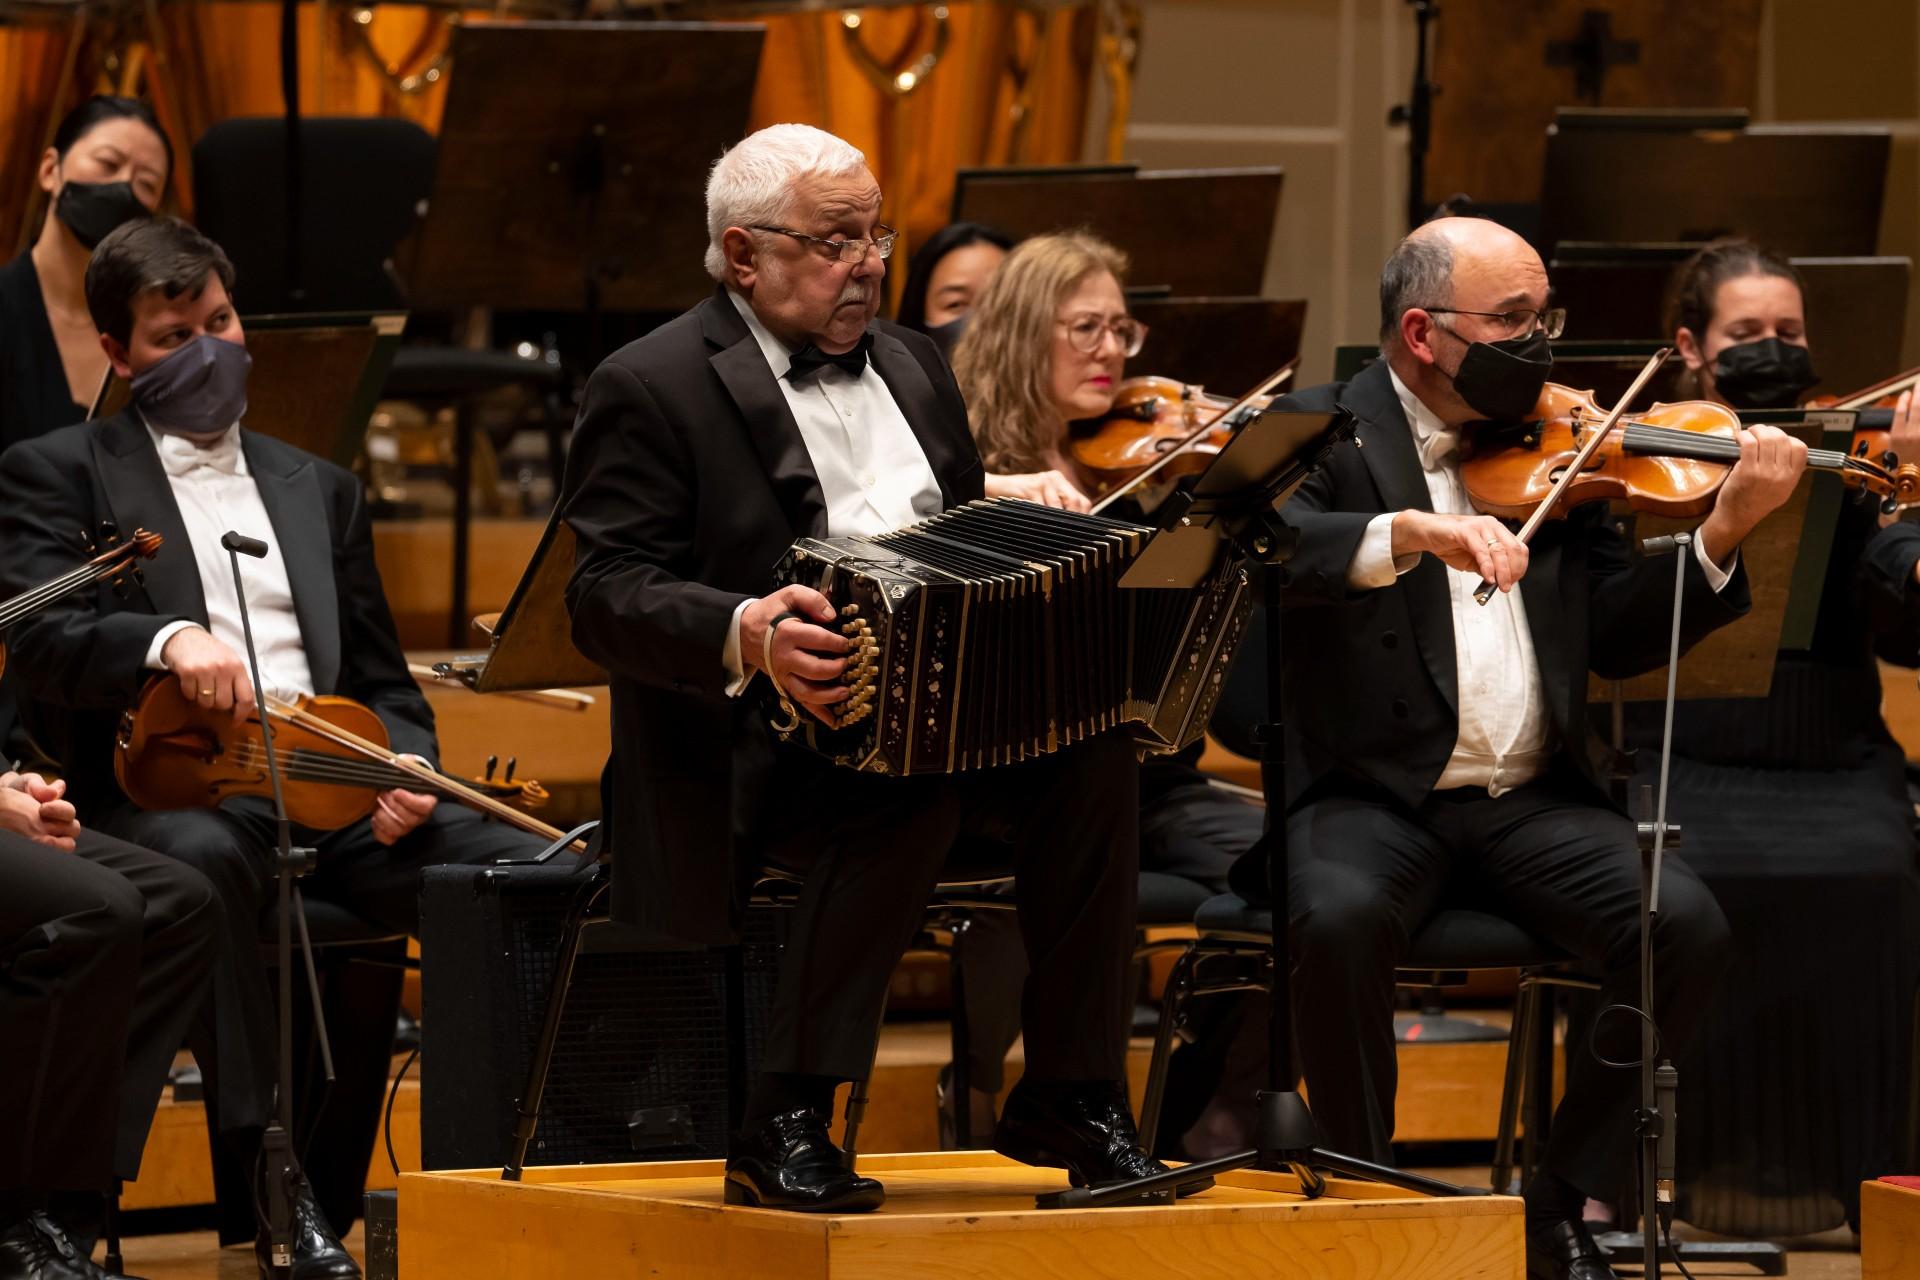 Daniel Binelli performs Piazzolla’s Bandoneon Concerto (Aconcagua) with the Chicago Symphony Orchestra led by guest conductor Giancarlo Guerrero. (Photo credit: Todd Rosenberg)